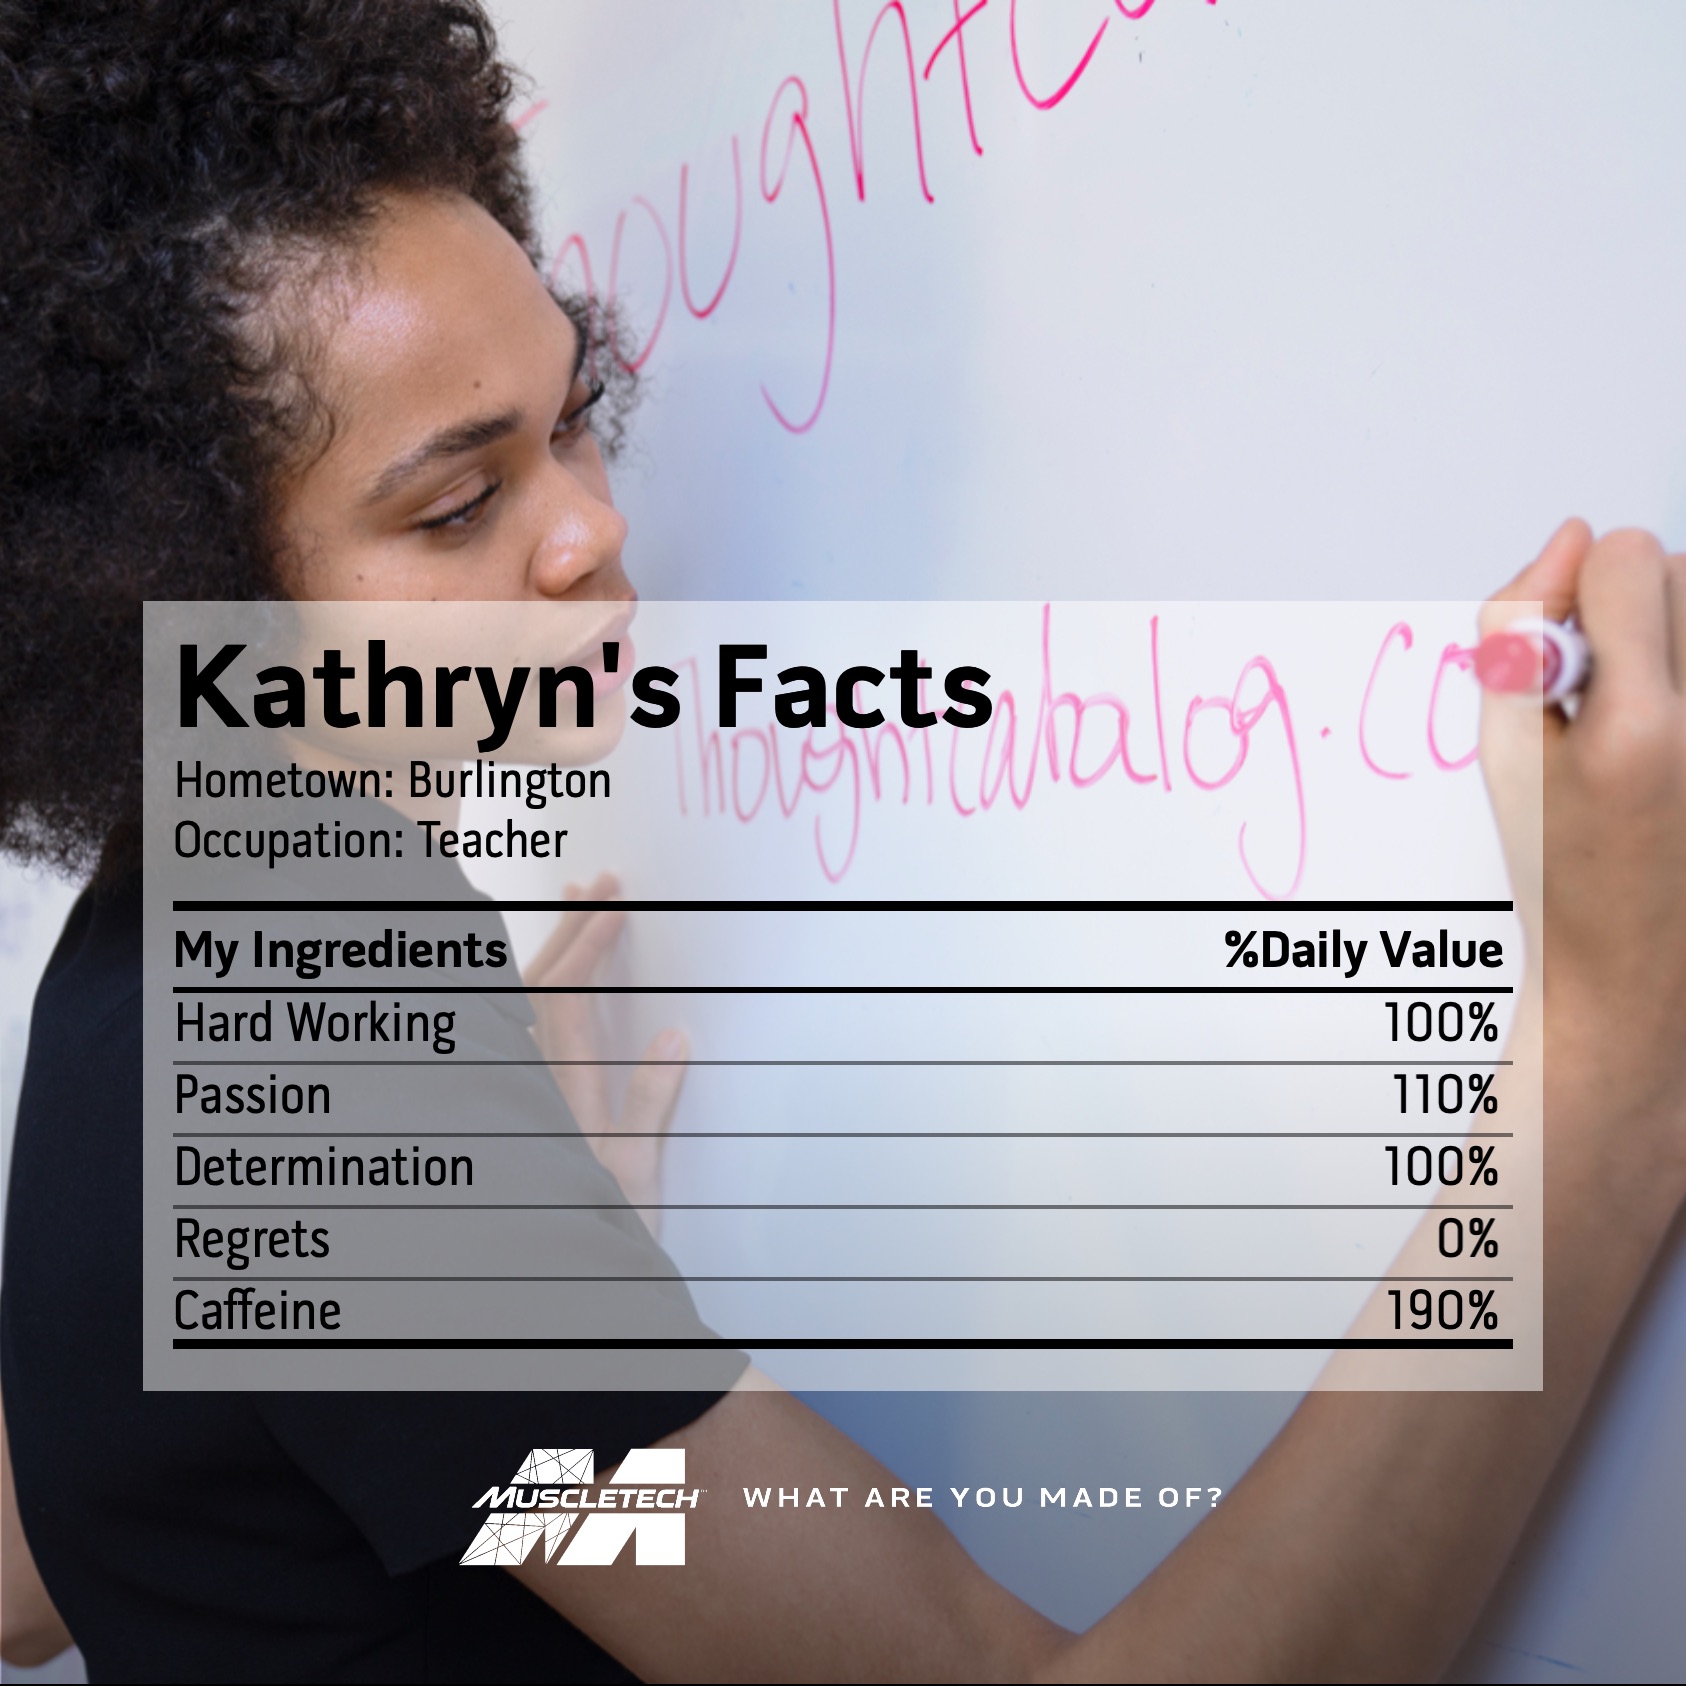 Kathryn's Facts